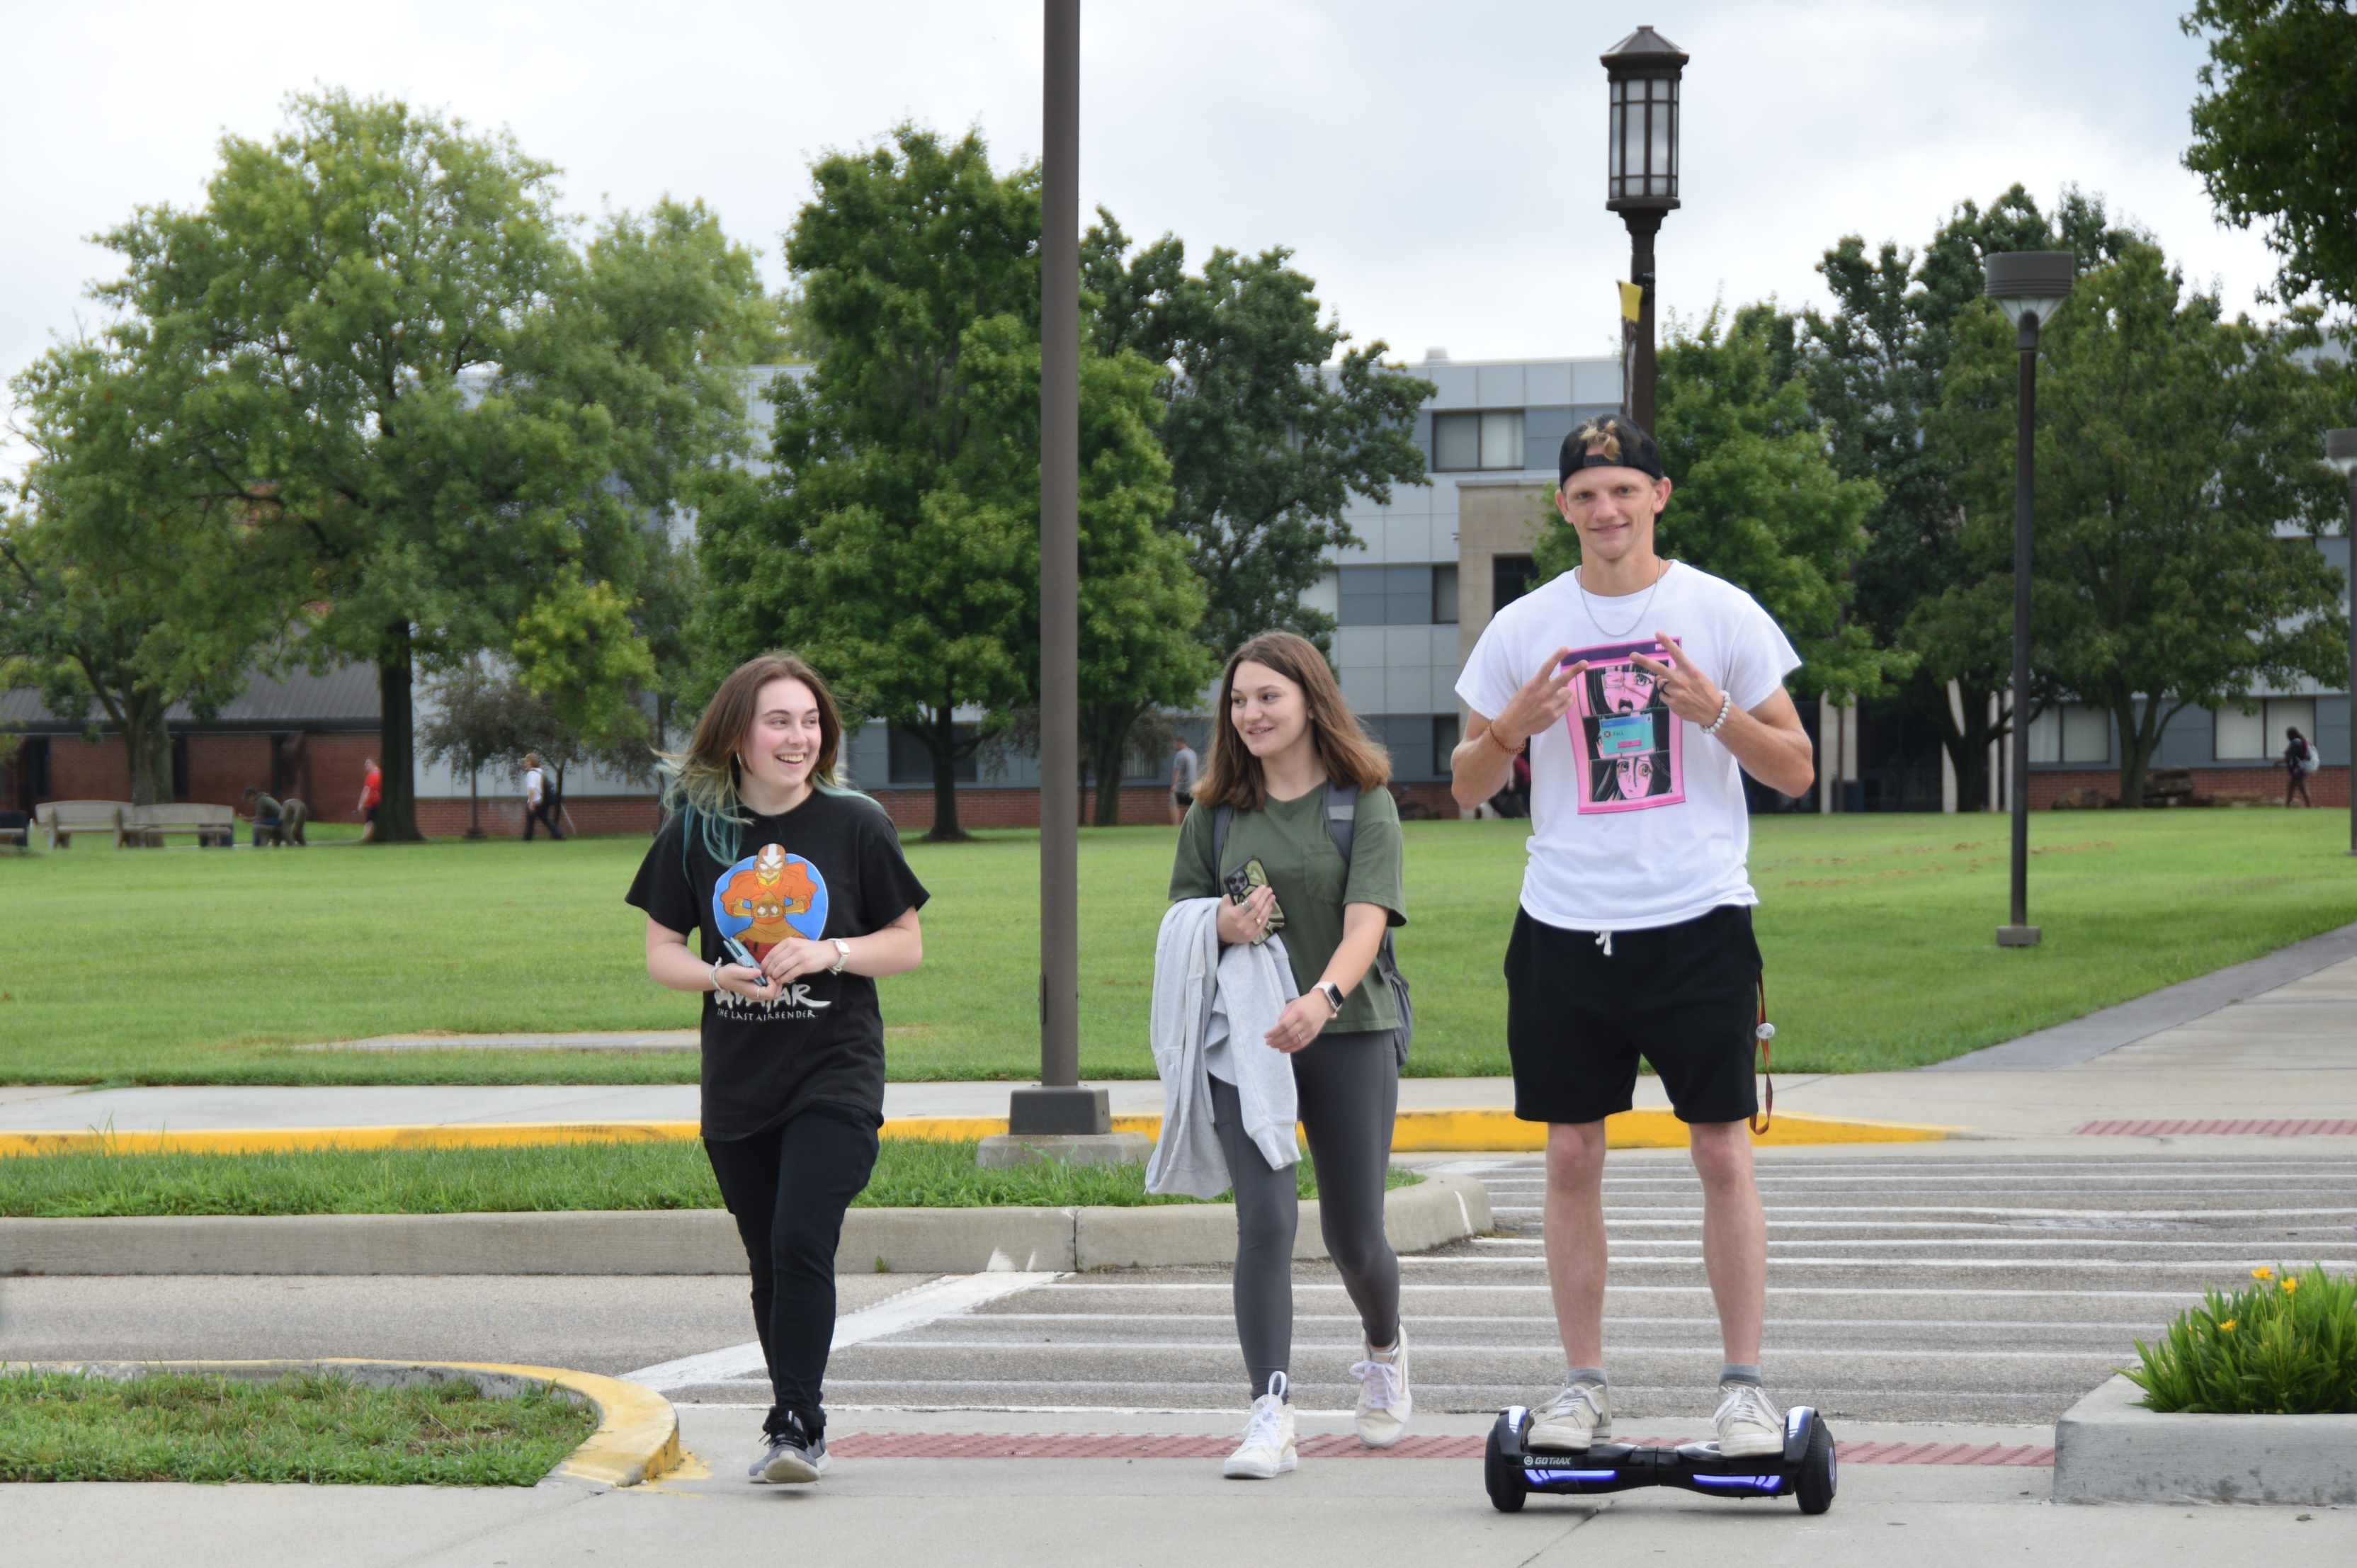 A male student flashing a peace sign and riding a hoverboard on campus with 2 female students next to him.